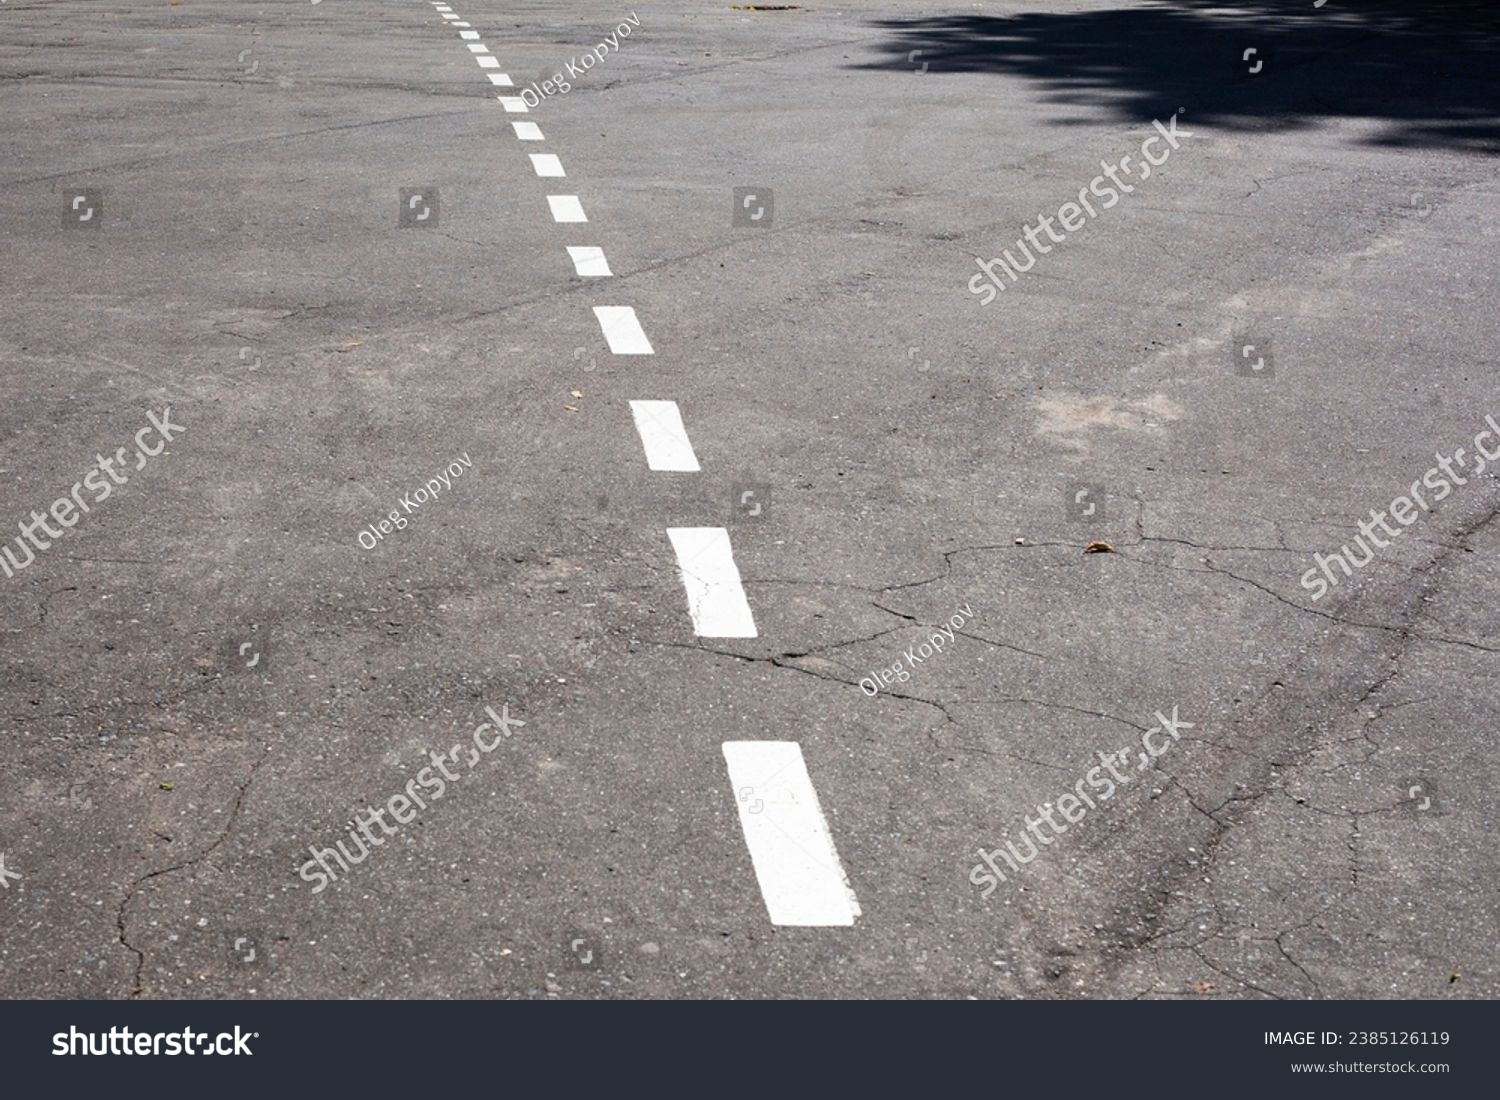 Dashed line. Markings on the road. White dotted line on the asphalt. Road markings on the highway. #2385126119